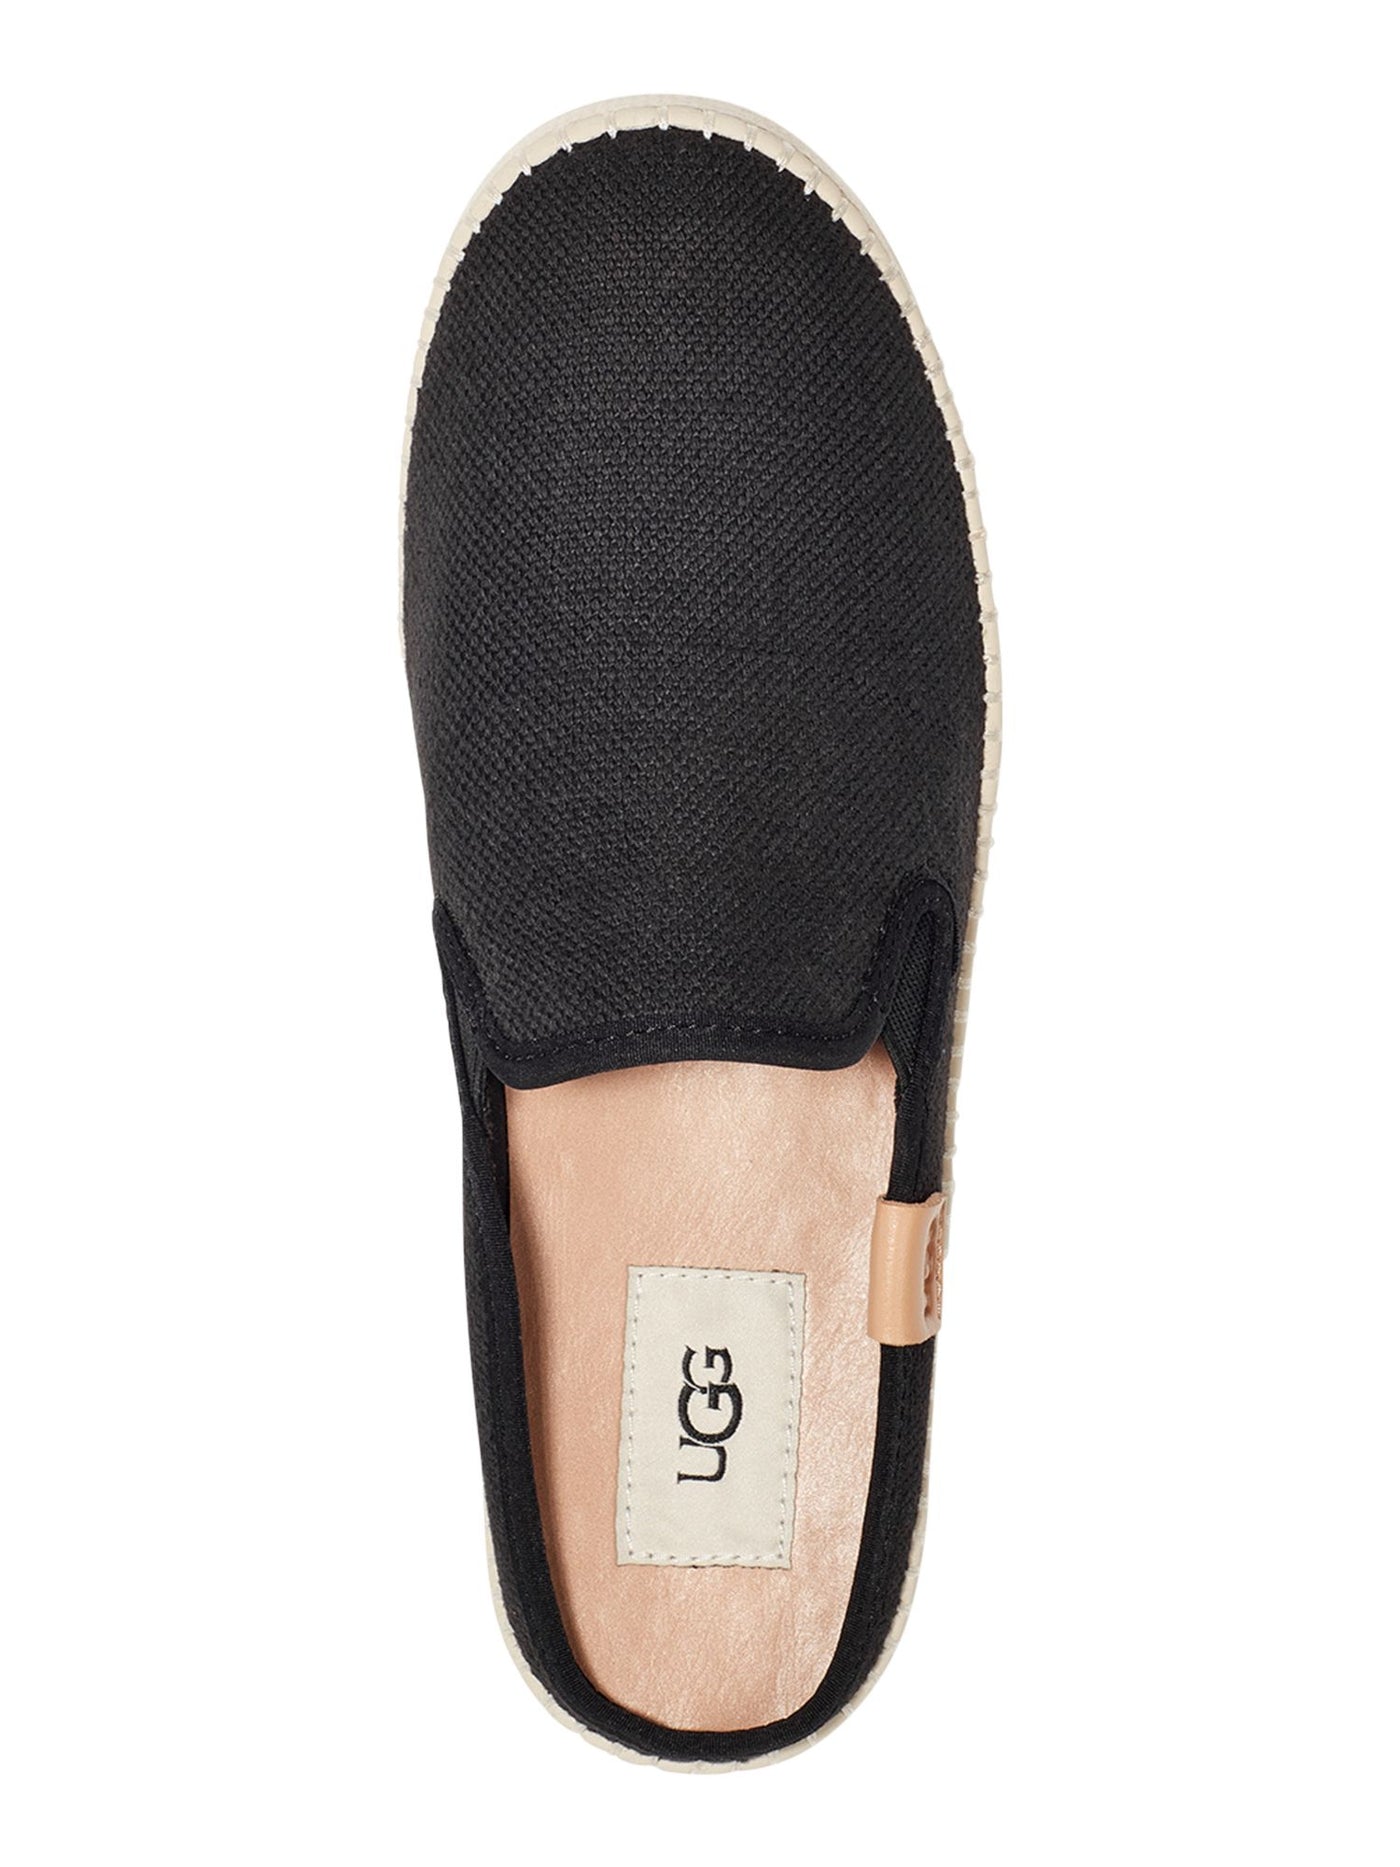 UGG Womens Black Goring Removable Insole Cushioned Delu Round Toe Platform Slip On Mules 7.5